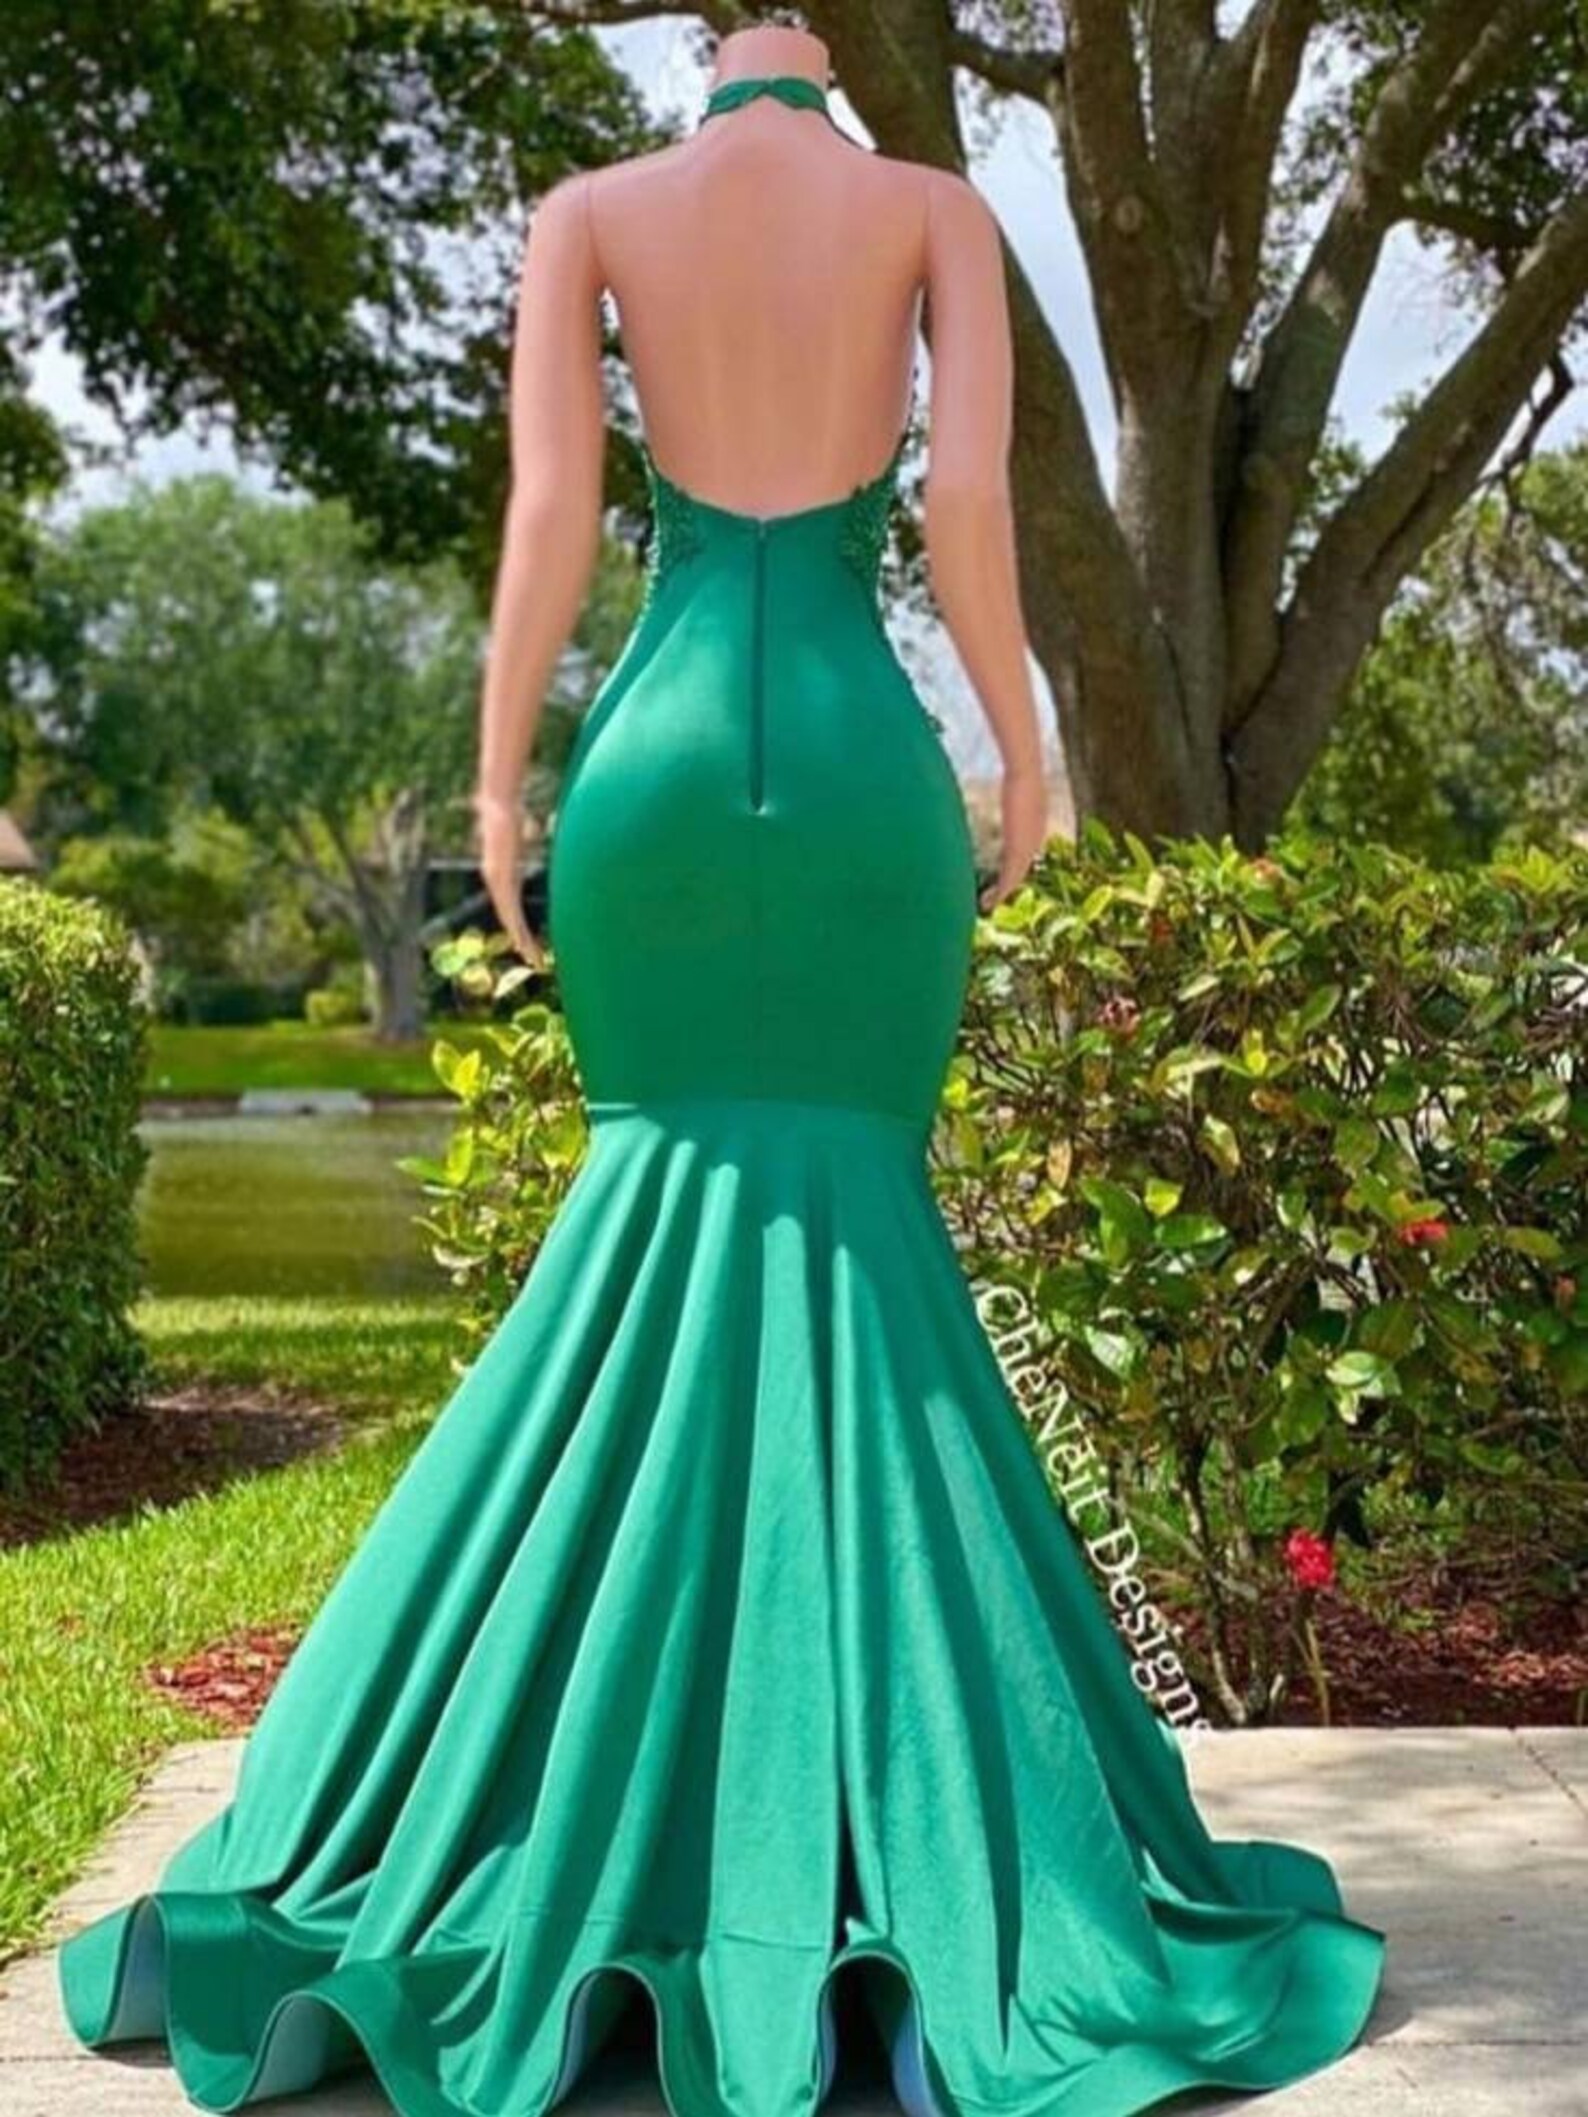 African Mermaid Prom Dress African Clothing for Womenafrican | Etsy